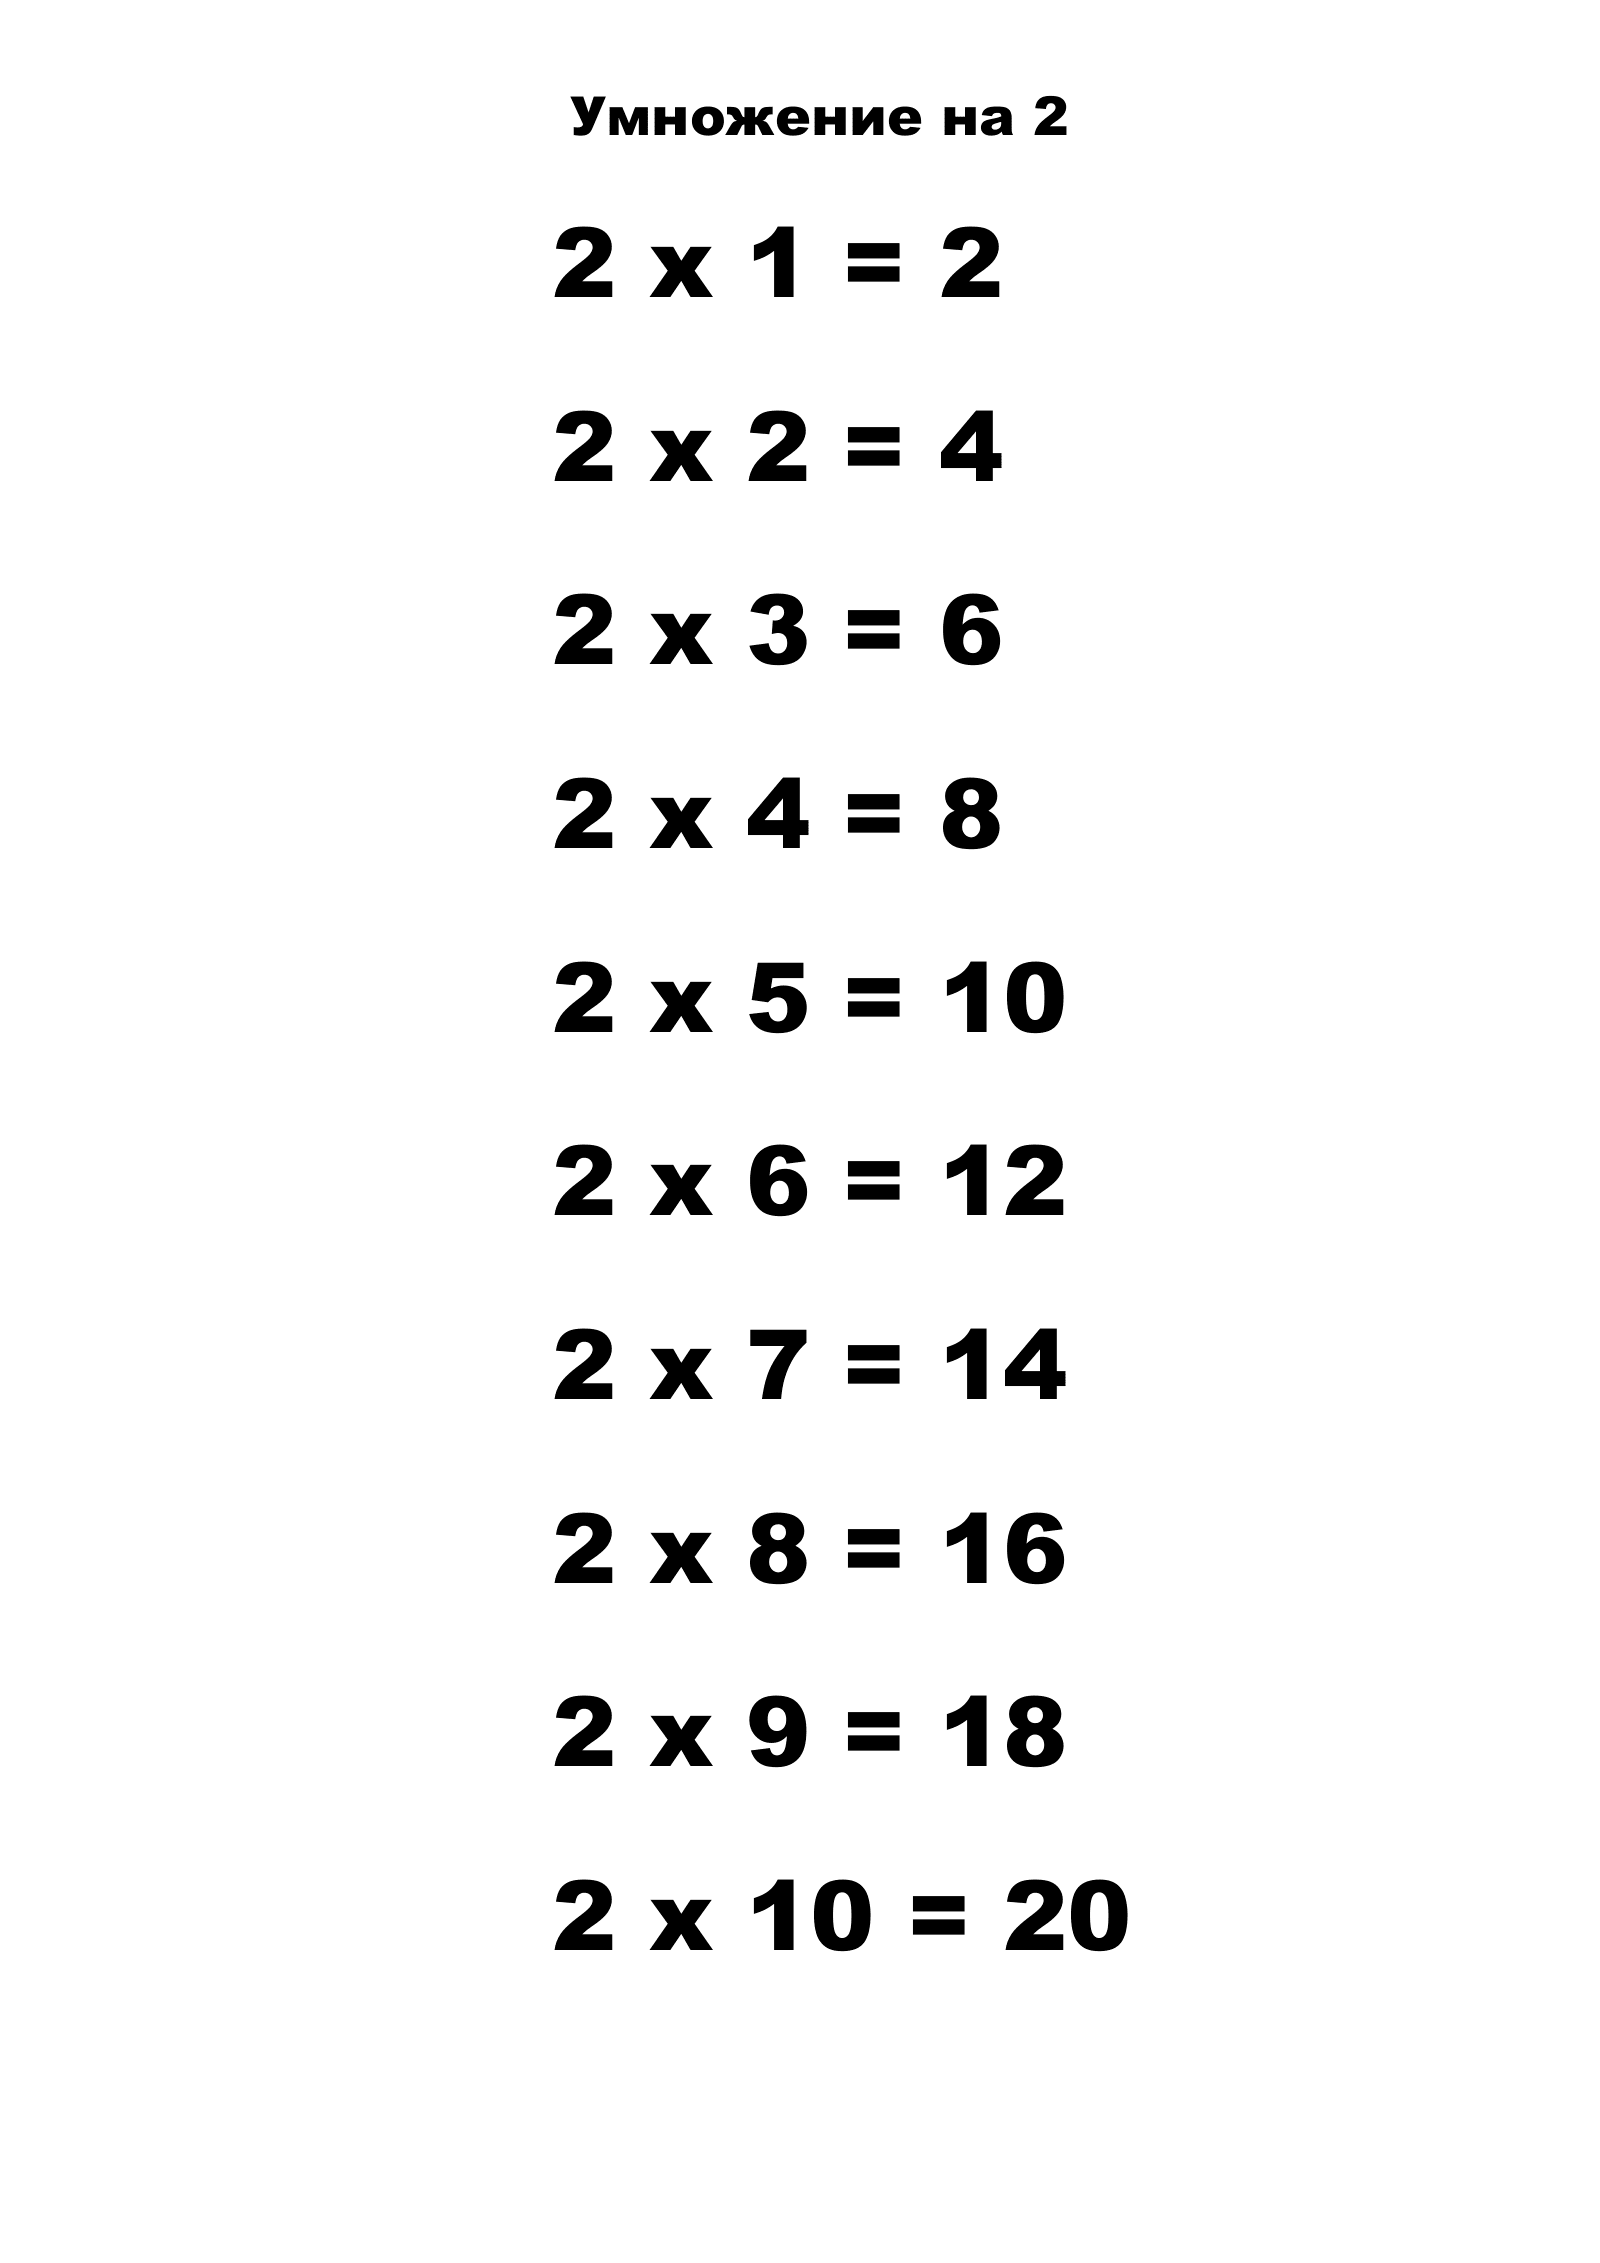 Multiplication Table for 2.